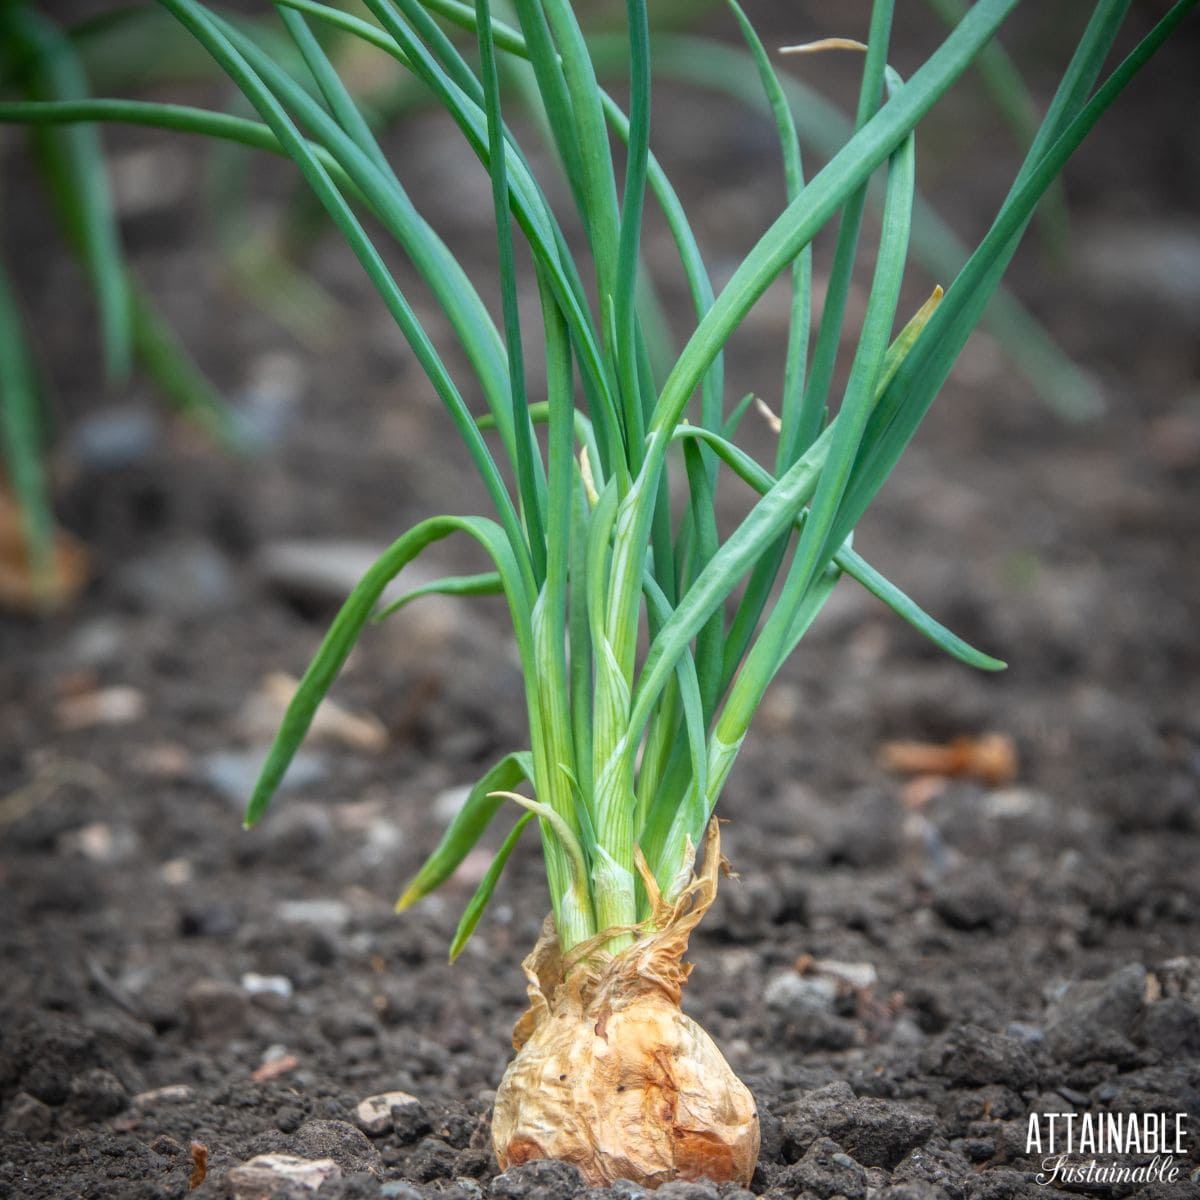 Growing Shallots for Gourmet Gardening